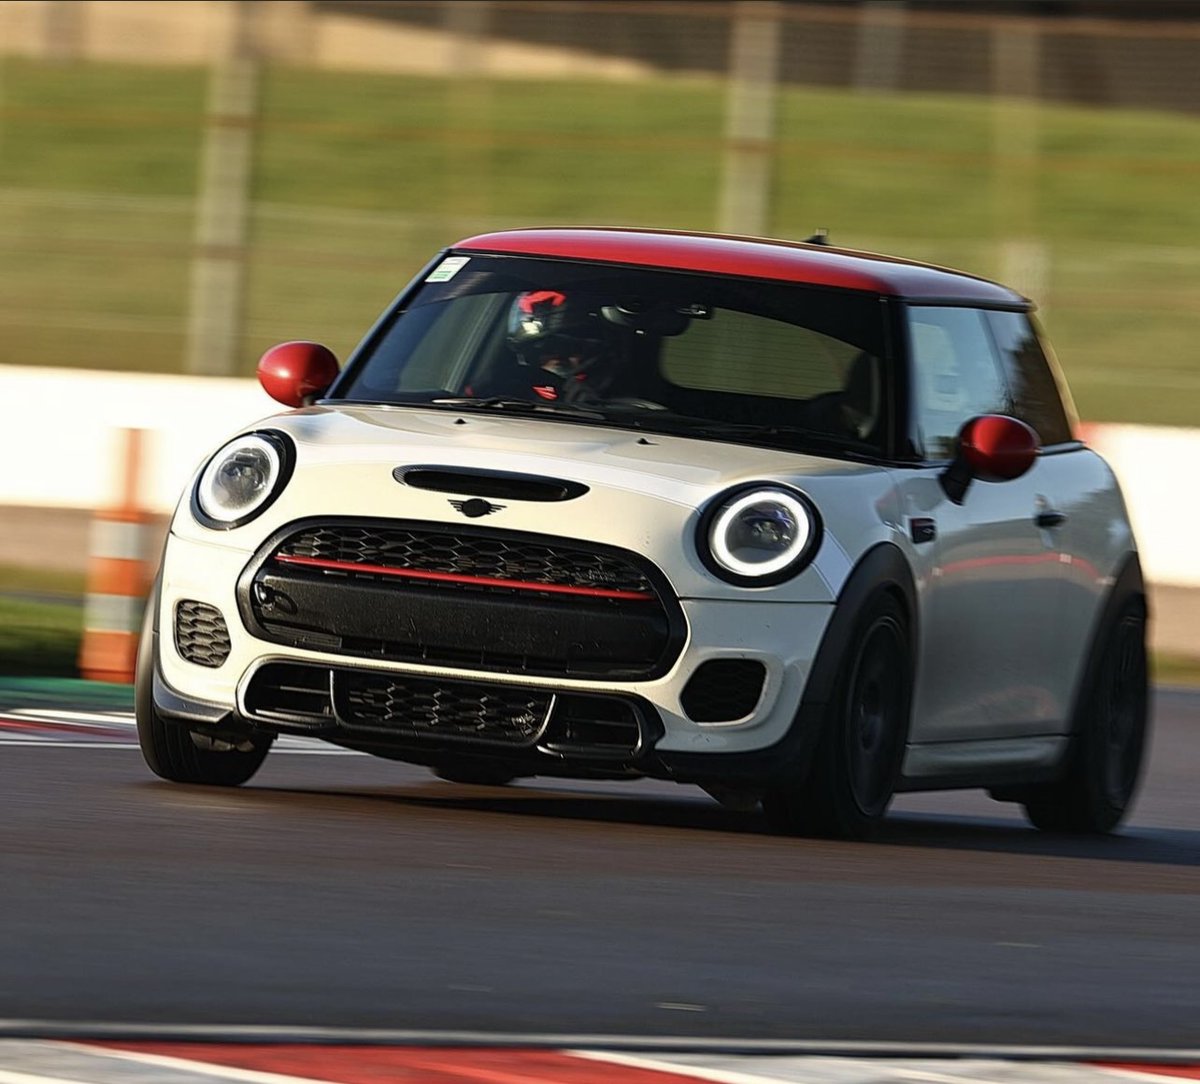 From city streets to the racetrack🚥⁠ ⁠ Your MINI can conquer every mile with style and speed🏁💨⁠ ⁠ 📷&🏎️: @fraz.jcw⁠ ⁠ #MINIRichmond #MINICooper #MINIJcw⁠